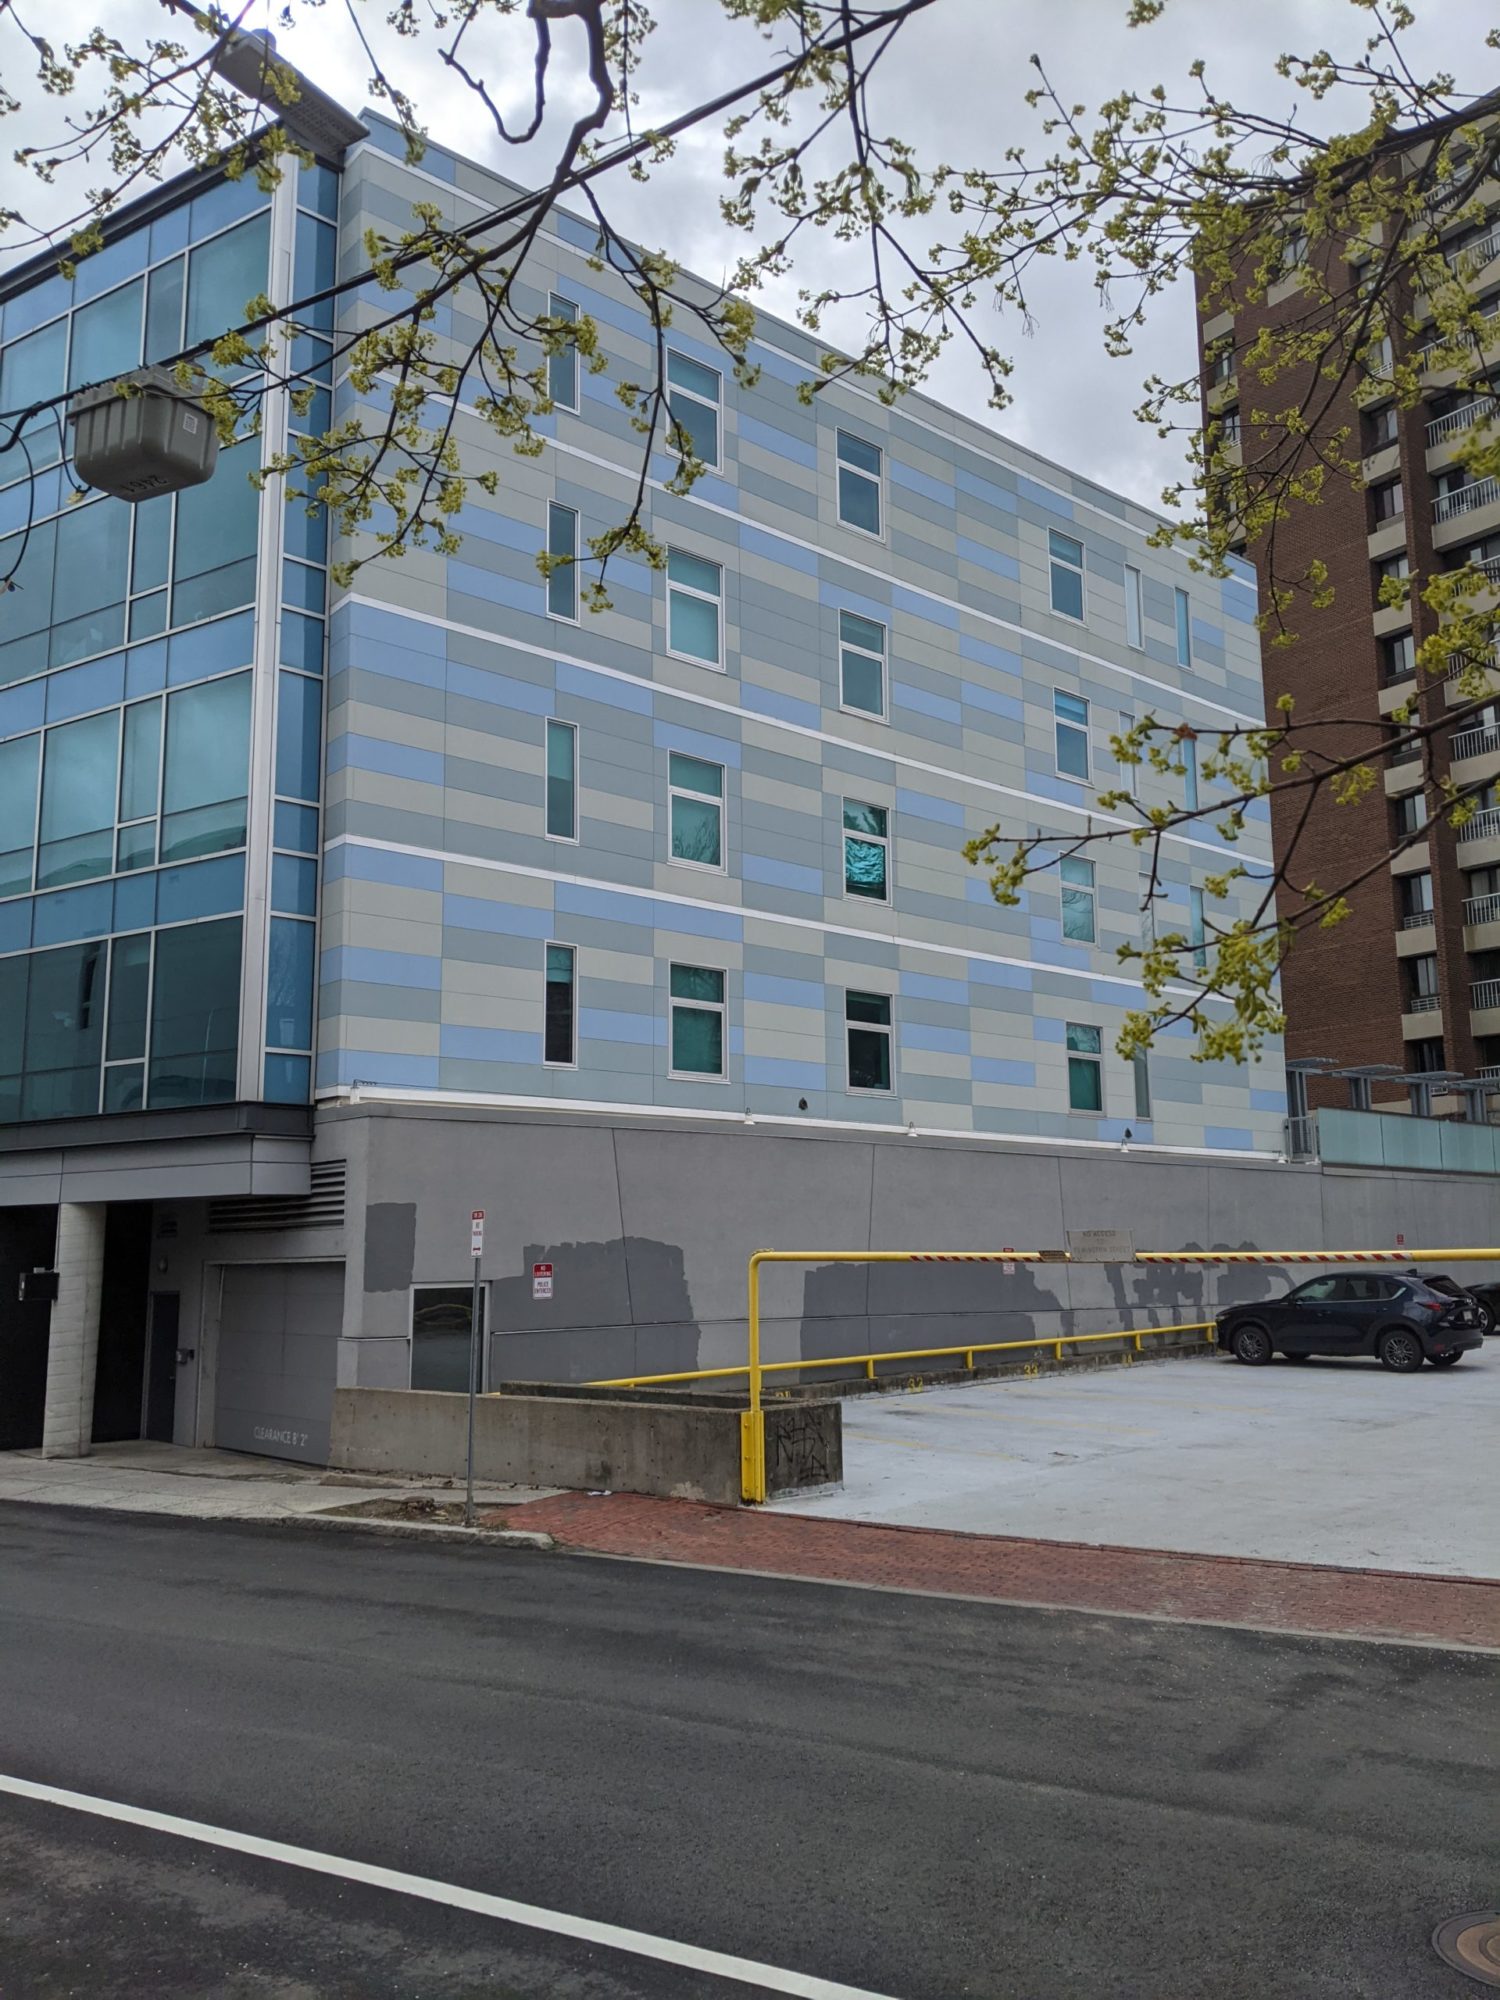 An angled shot of a multi story apartment building and the top floor of a parking deck. The building has four floors in view. The front is glass, the side is cinderblocks varying between light blue, light grey, and light taupe. Another apartment building is in view.